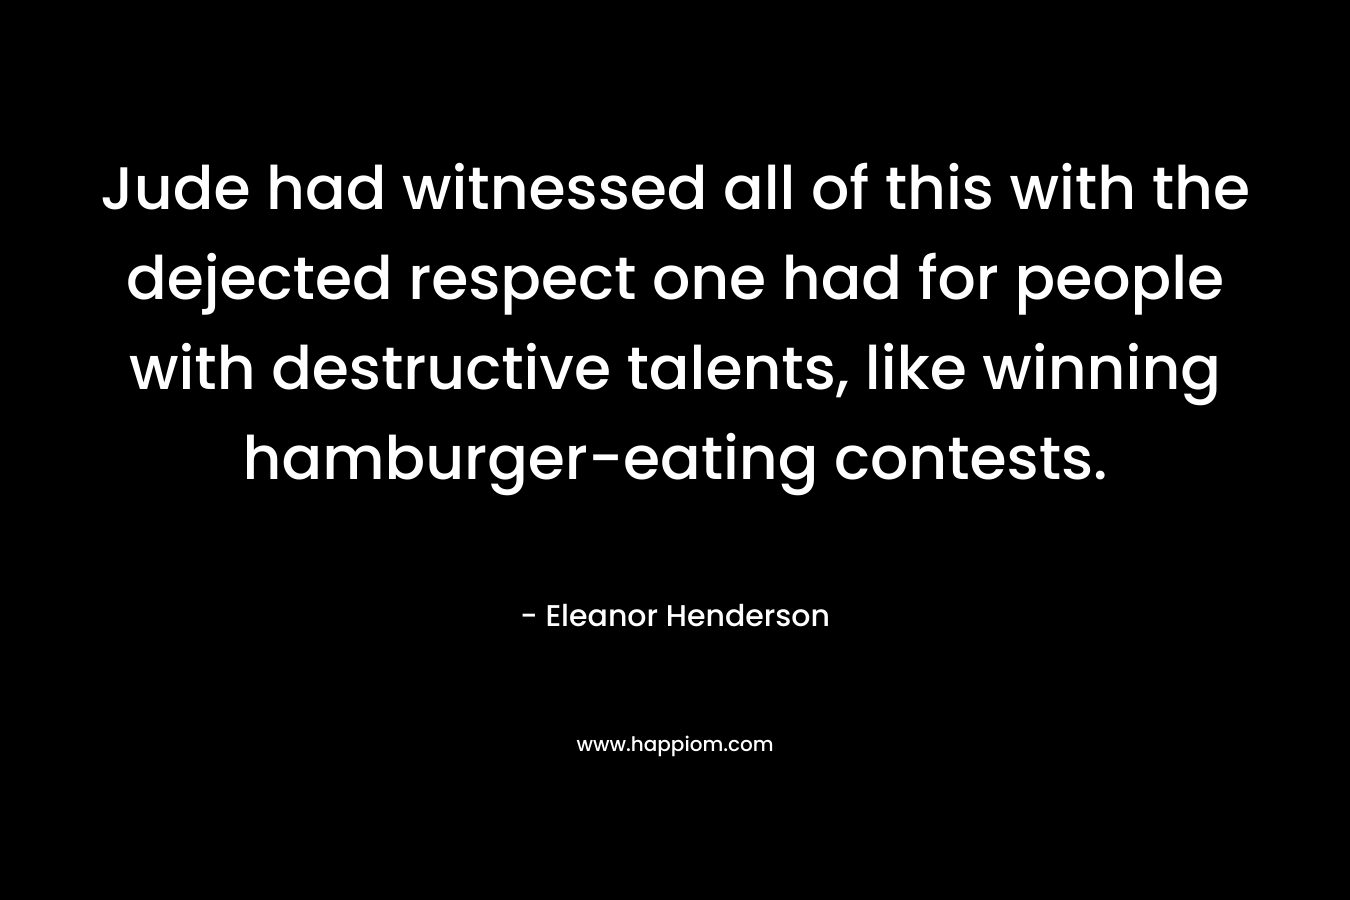 Jude had witnessed all of this with the dejected respect one had for people with destructive talents, like winning hamburger-eating contests. – Eleanor Henderson